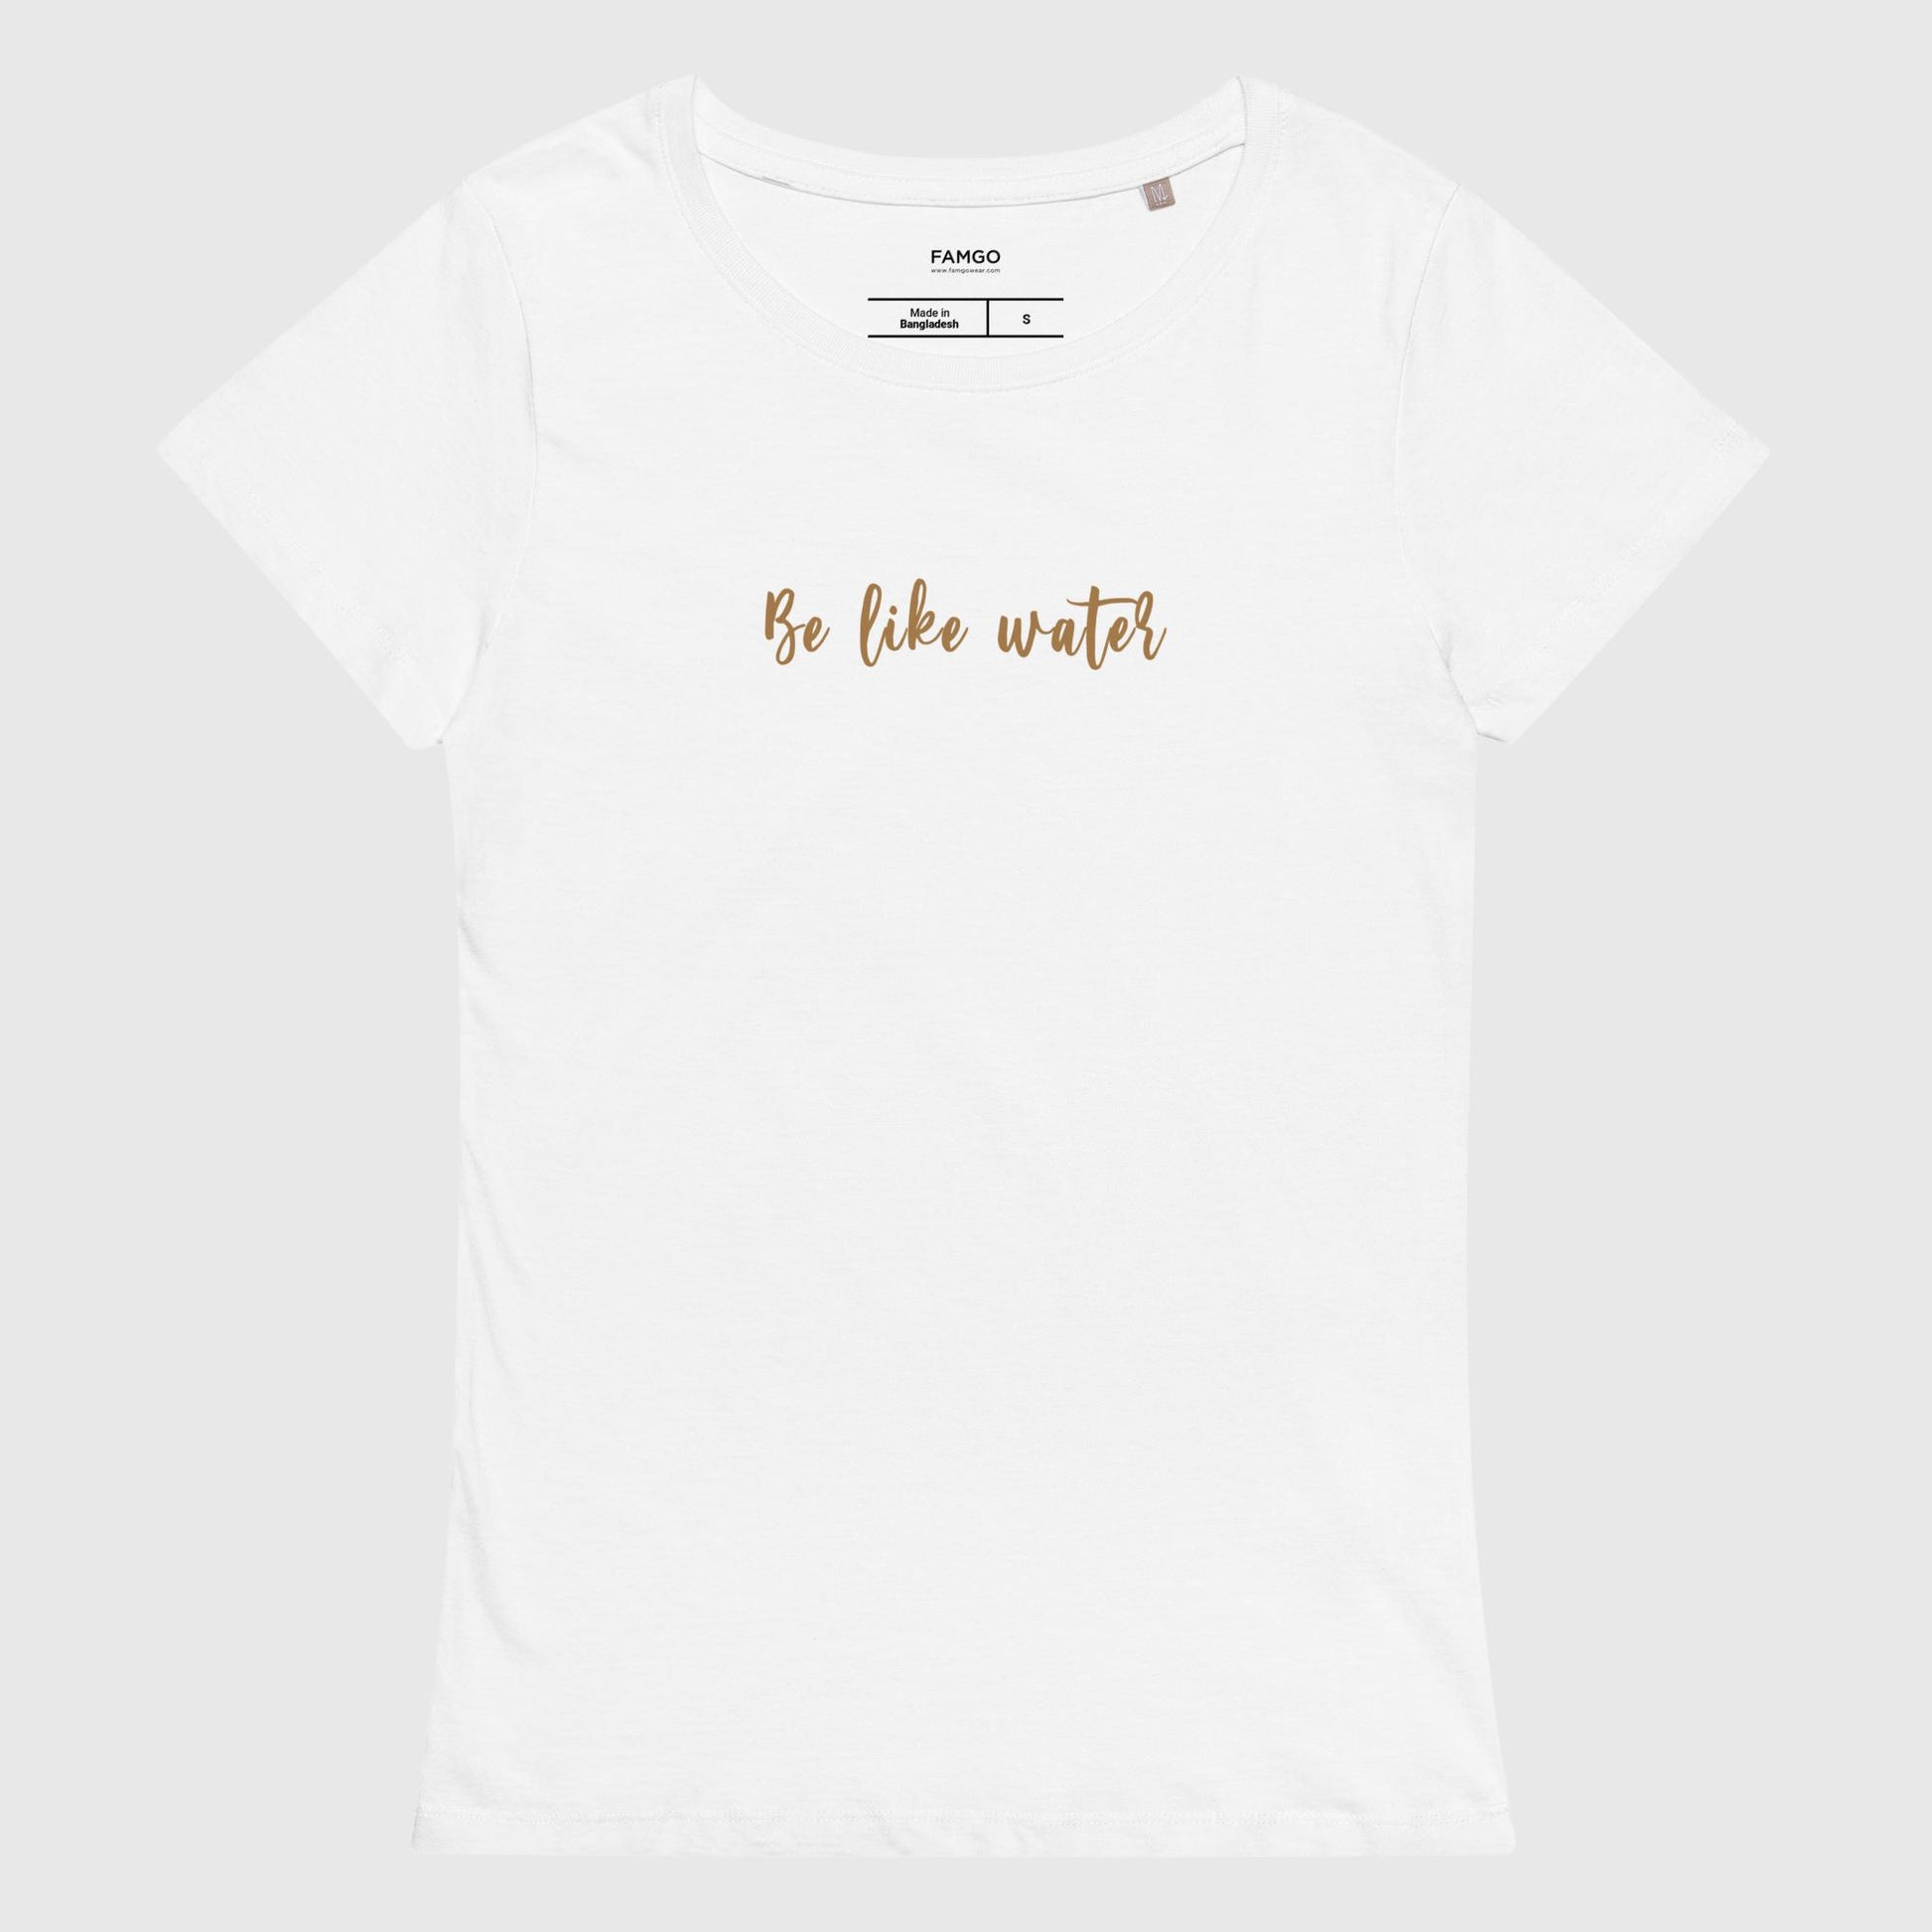 Women's white organic cotton t-shirt that features Bruce Lee's inspirational quote, "Be Like Water."